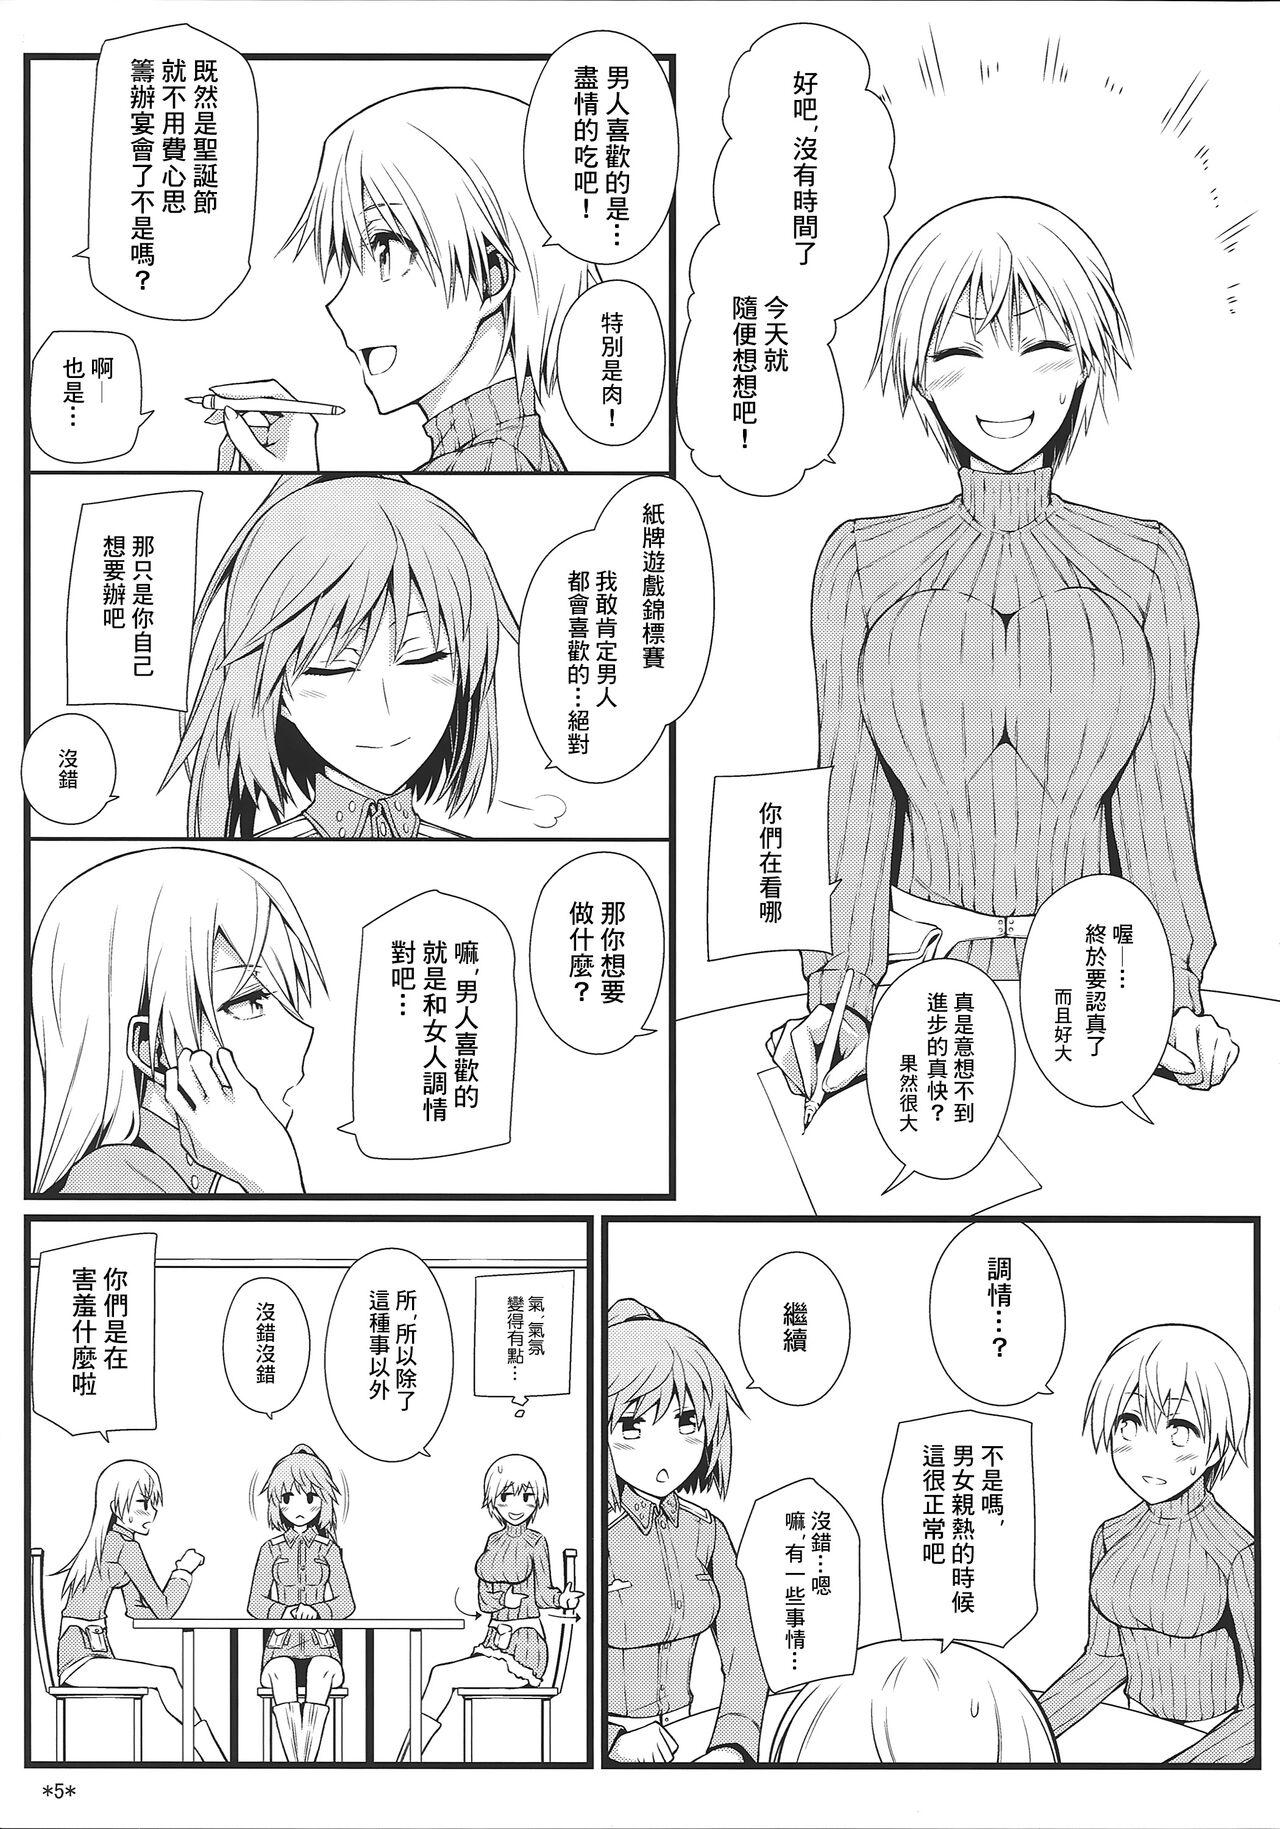 Camwhore KARLSLAND SYNDROME 3 - Strike witches Online - Page 7